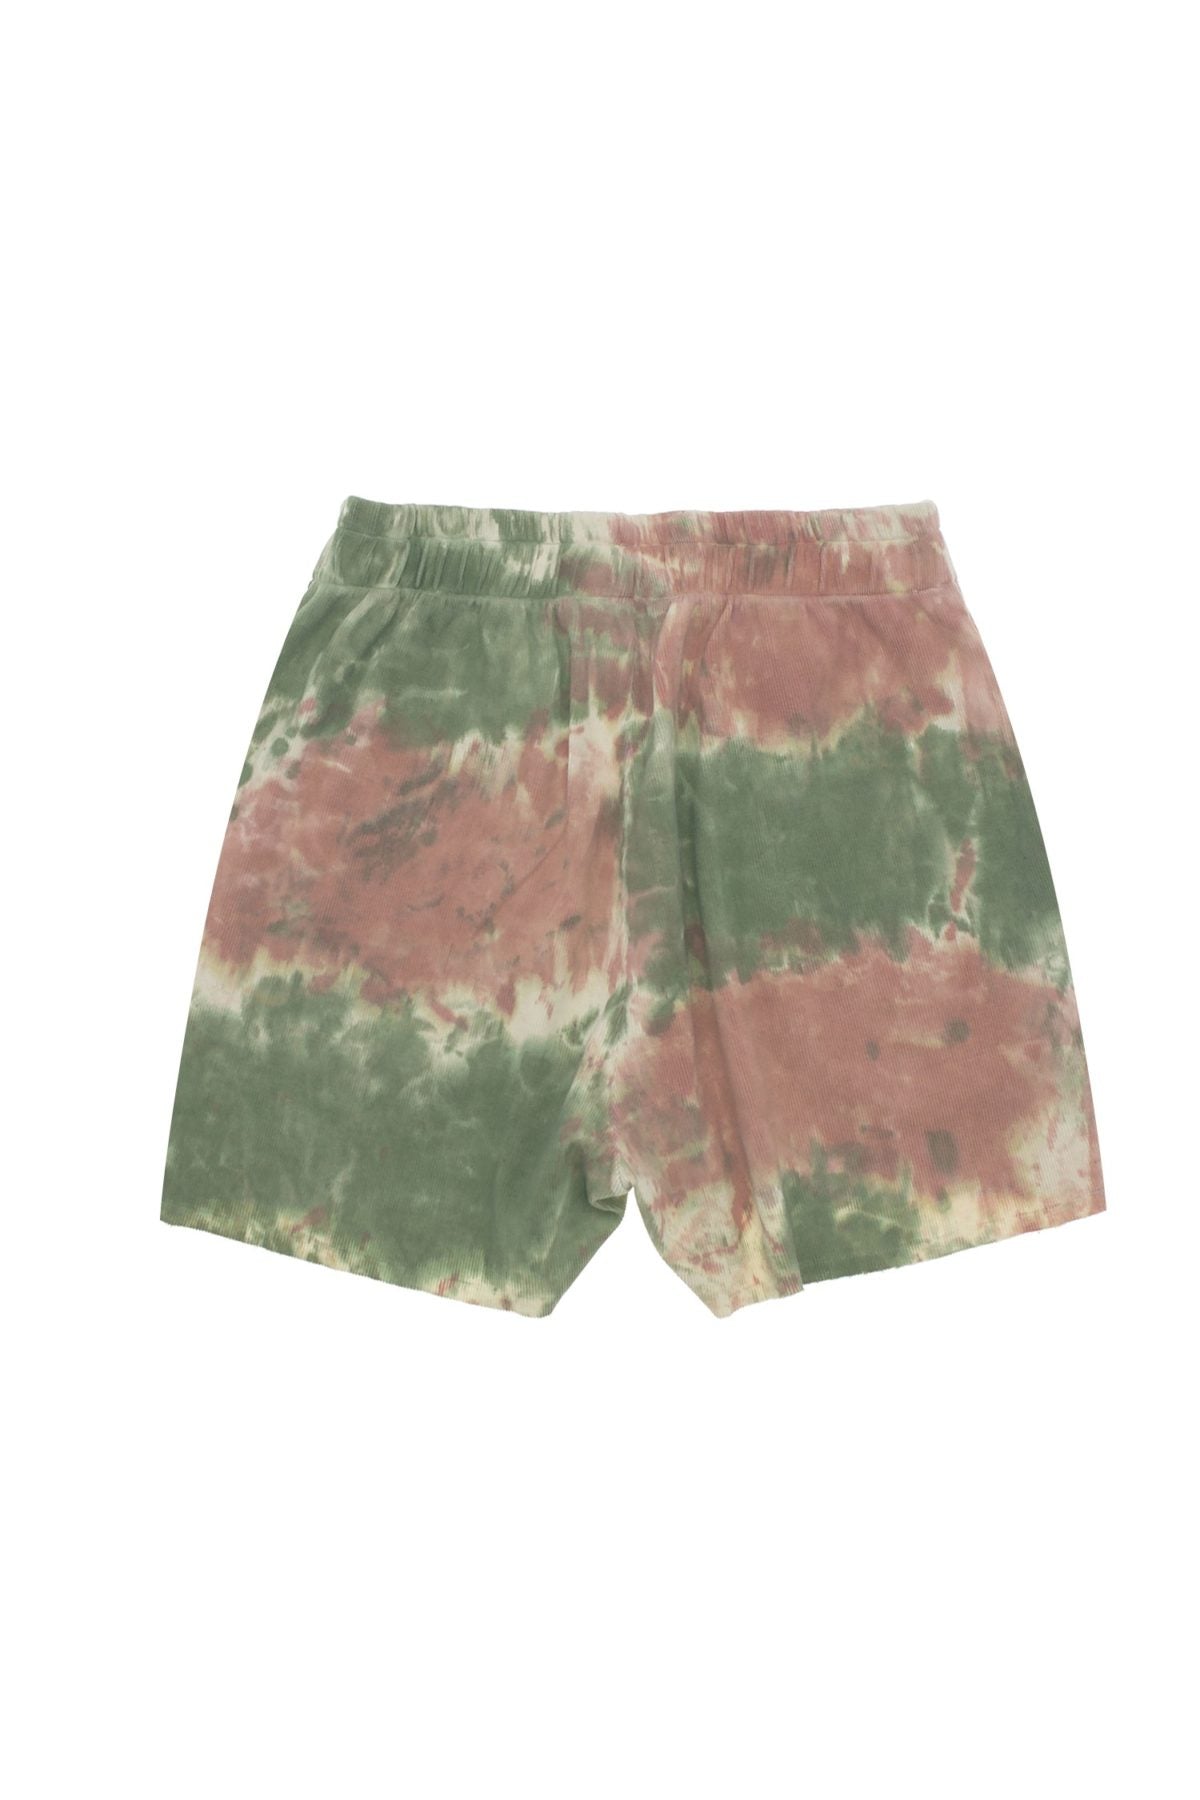 Load image into Gallery viewer, Cotton Relax Shorts - Soil
